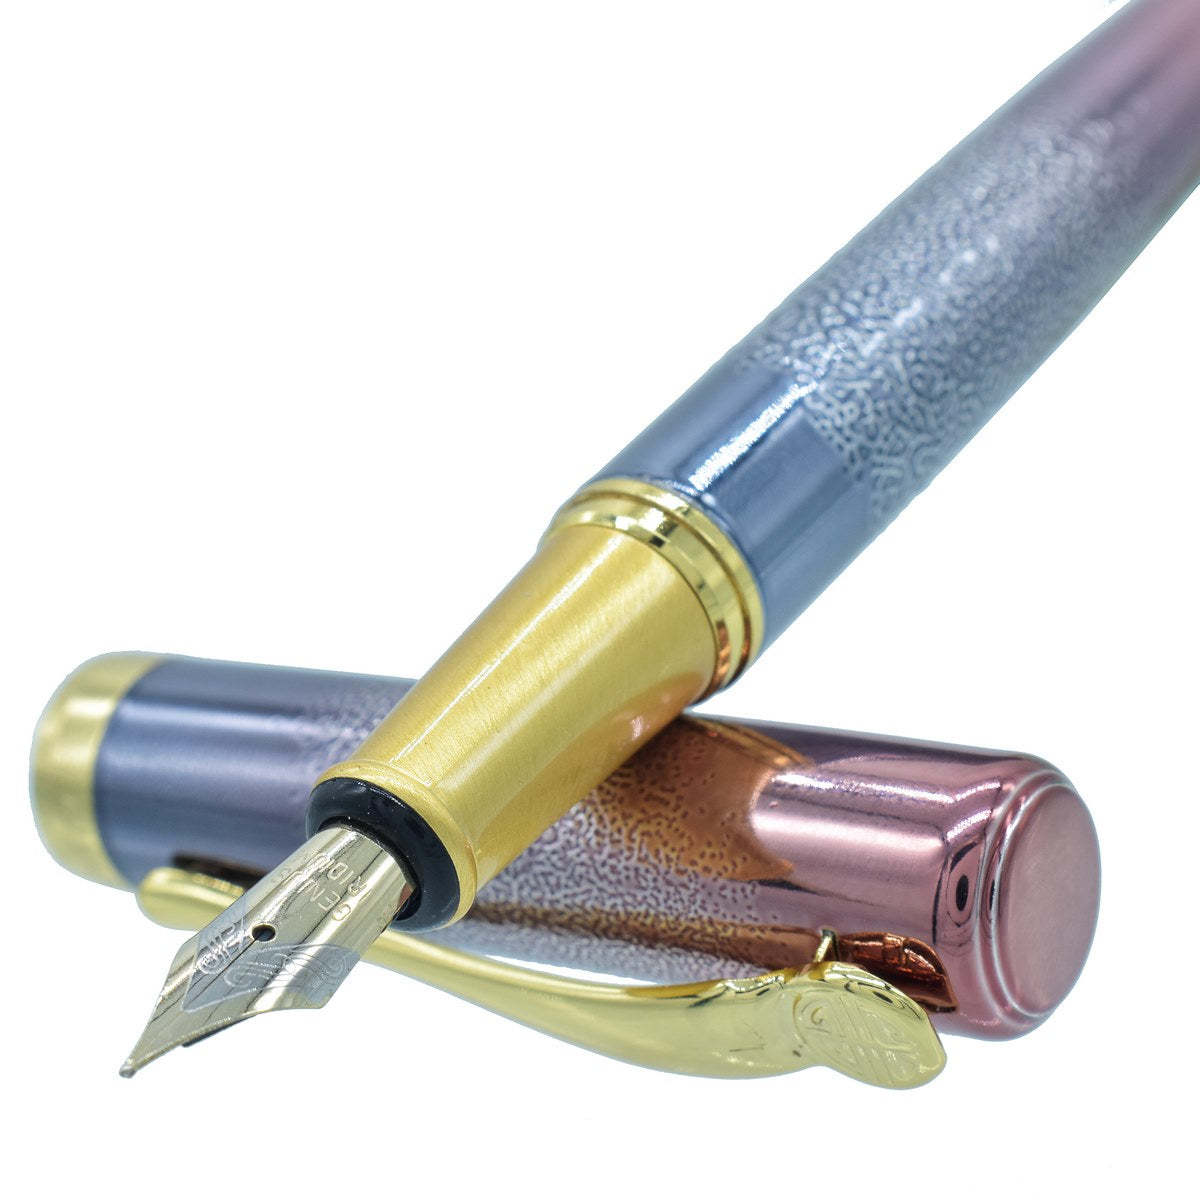 Multi Color Fountain Pen with Golden Clip - Perfect for Gifting, Luxurious Pen for Writers